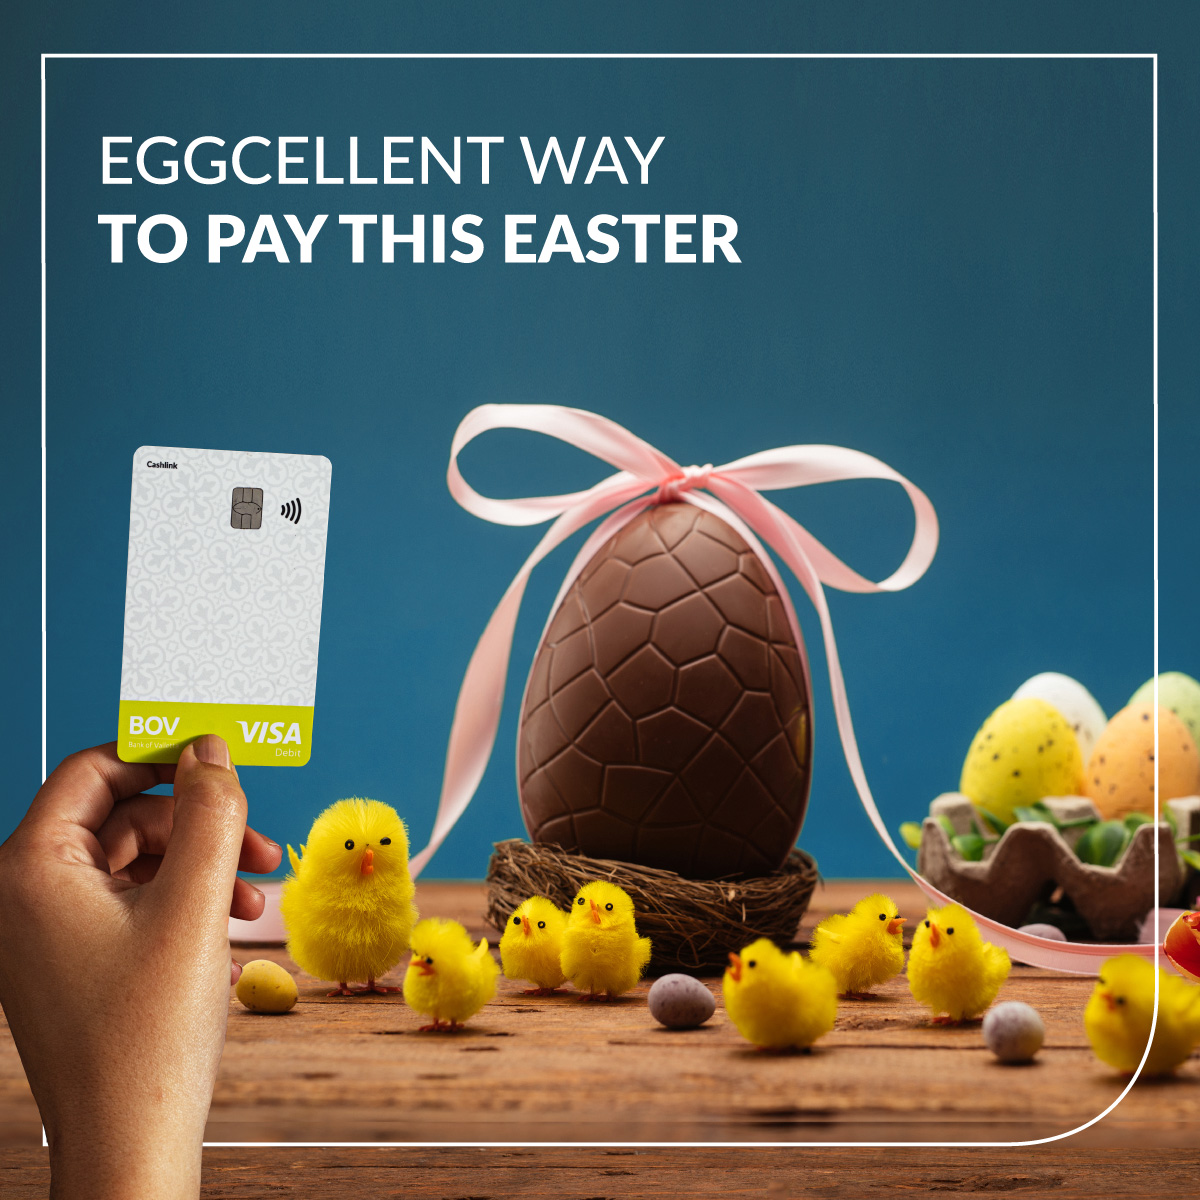 A BOV Eggcellent way to pay this Easter